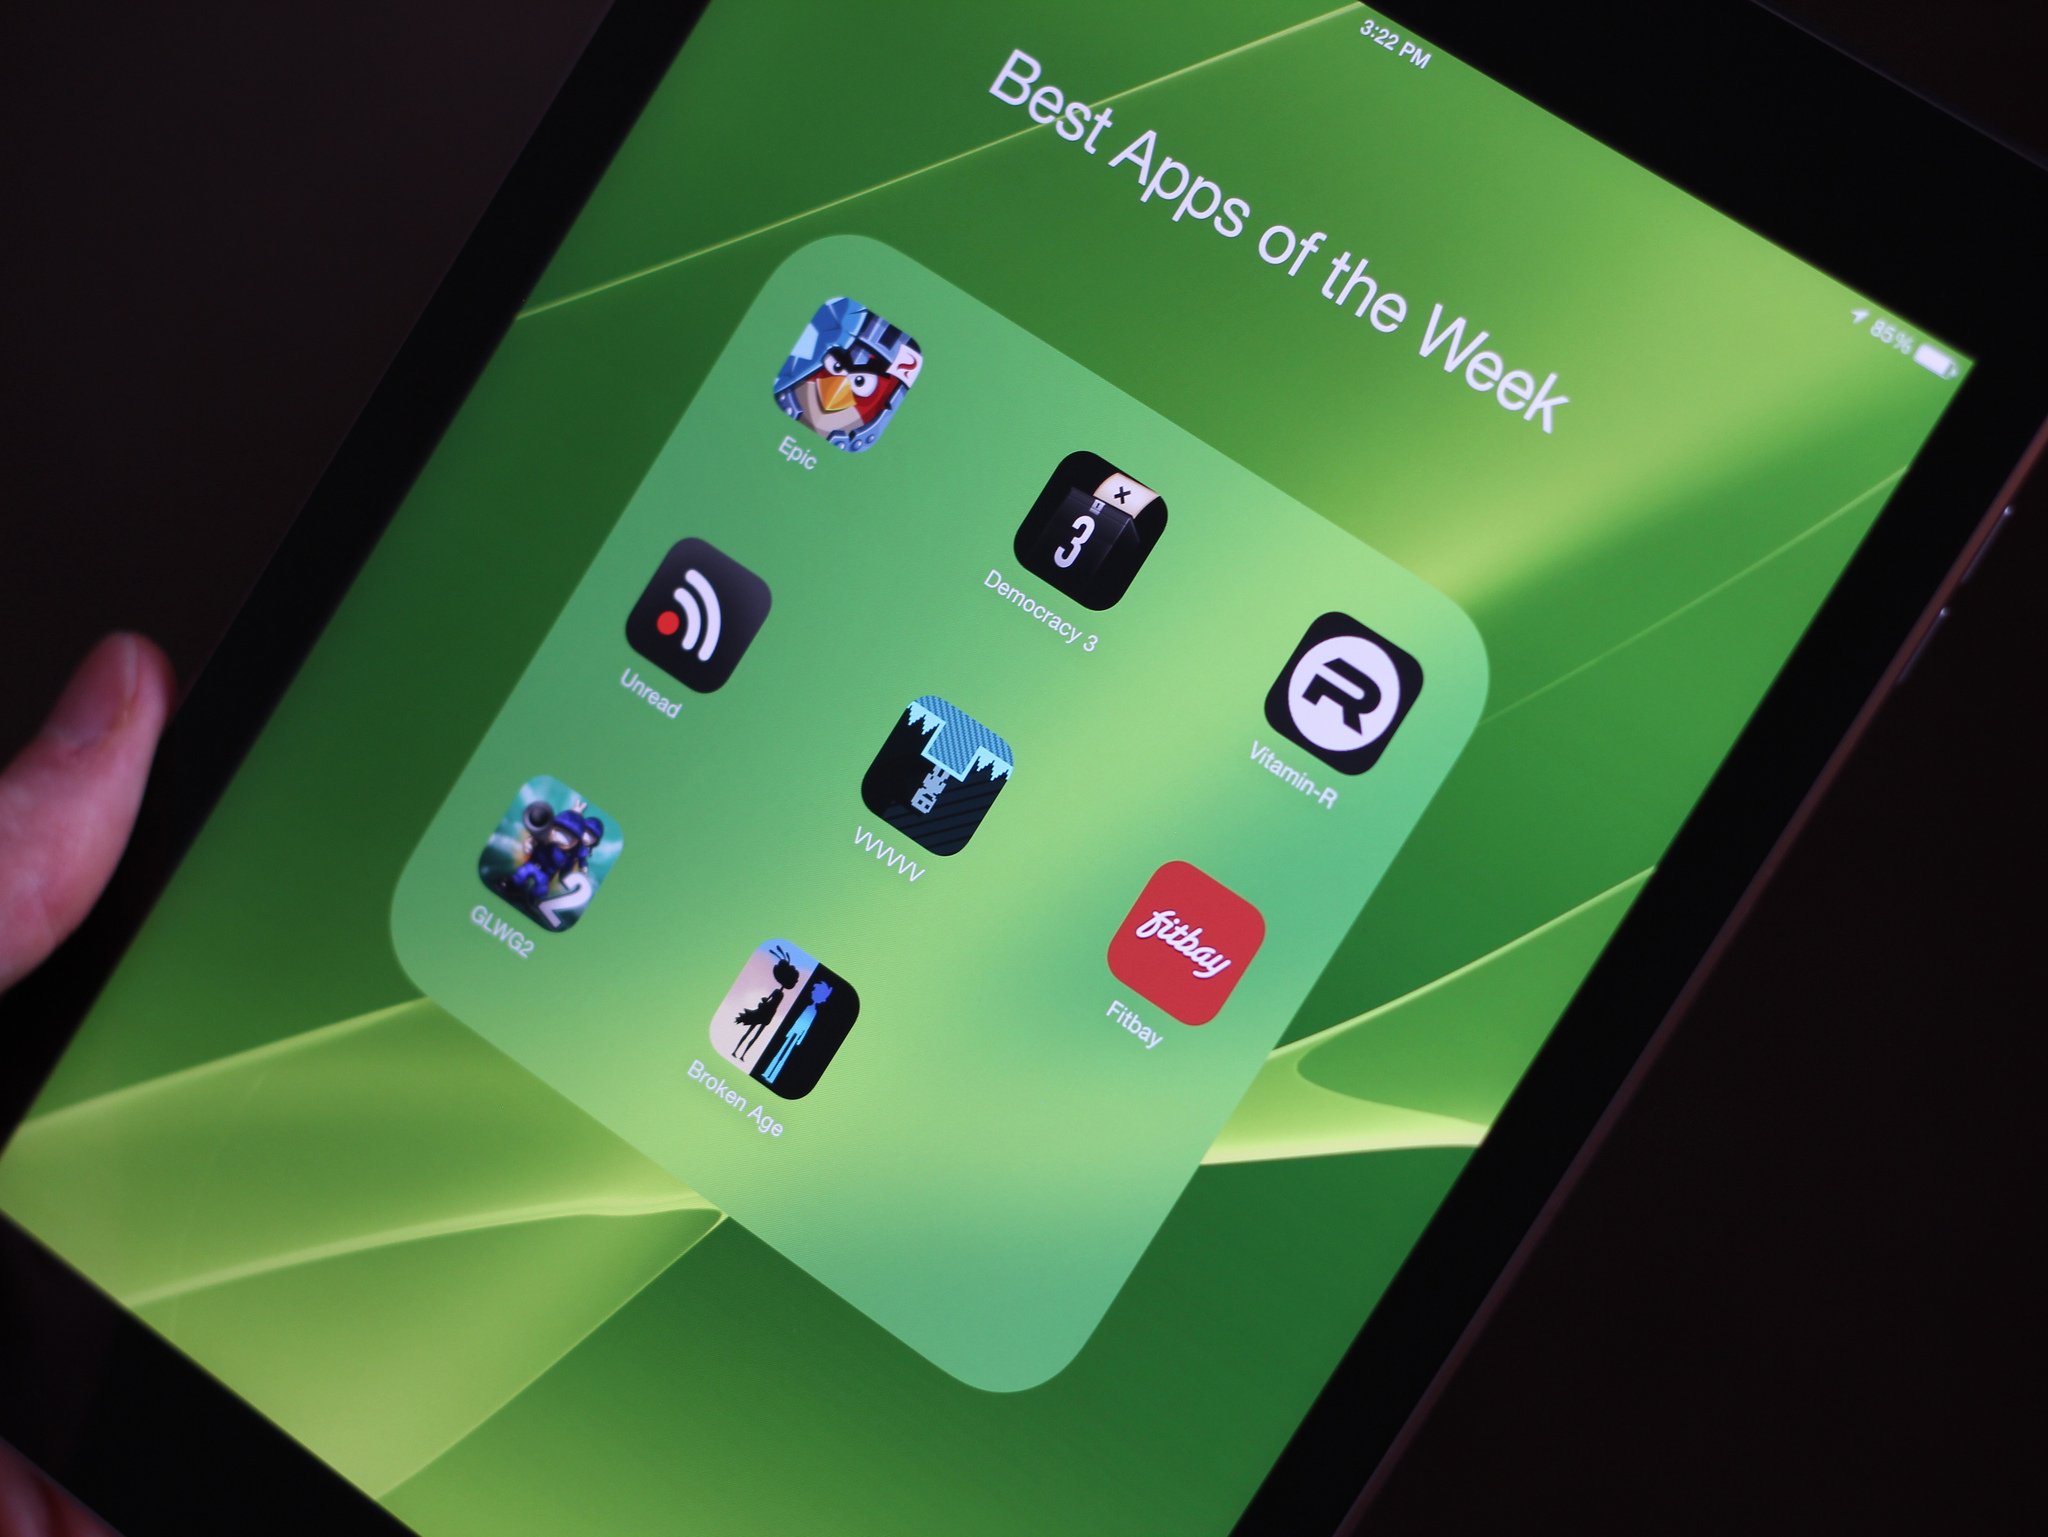 iPhone and iPad apps of the week